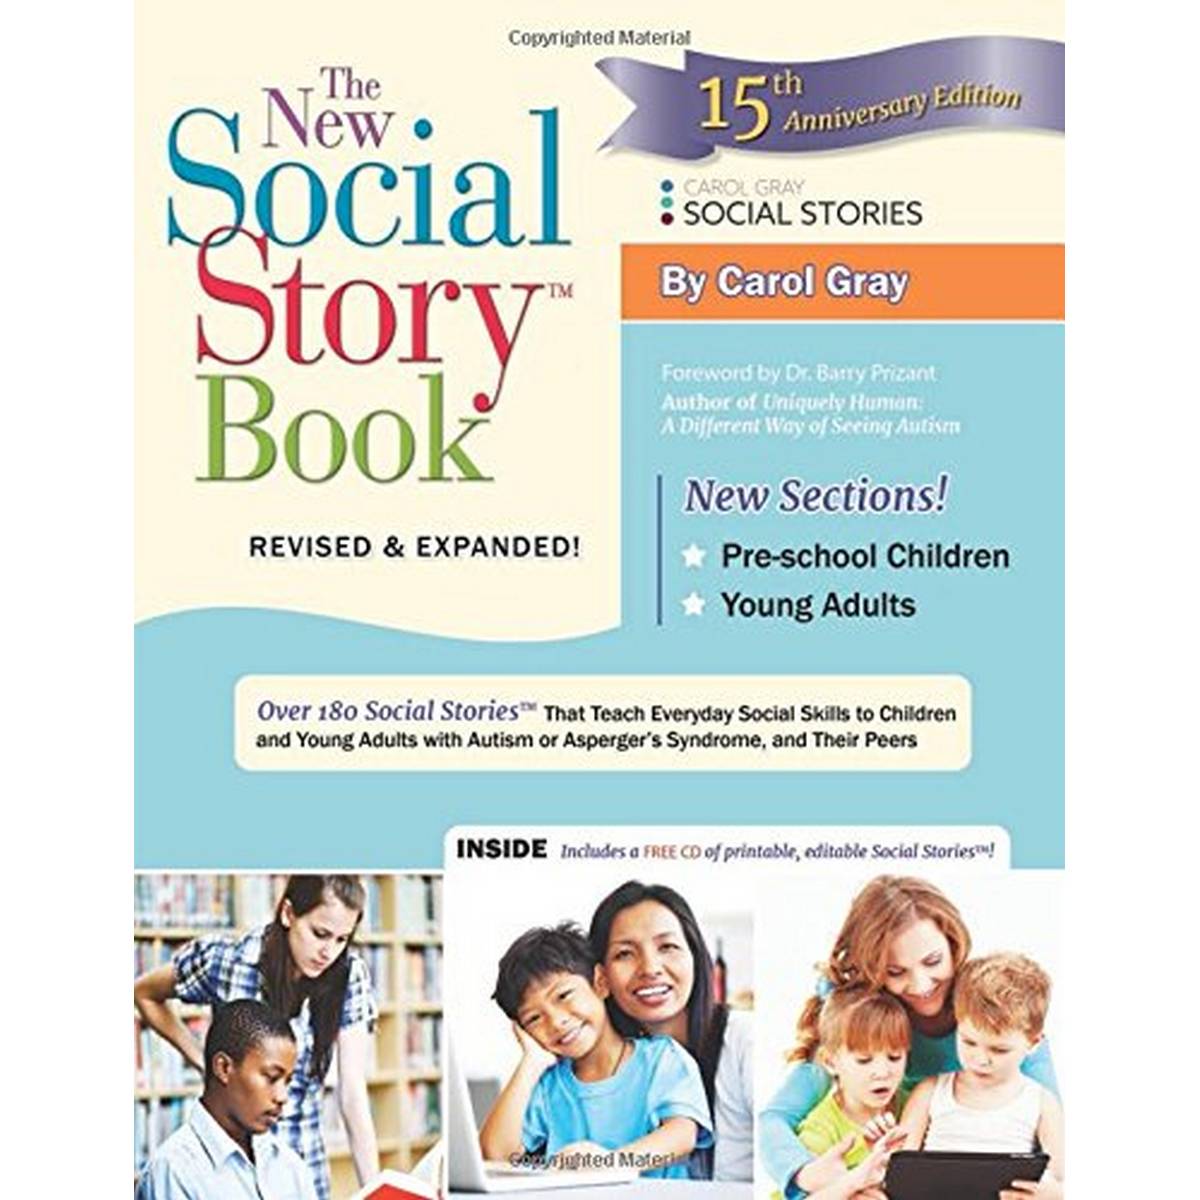 The New Social Story Book 15th Anniversary Edition